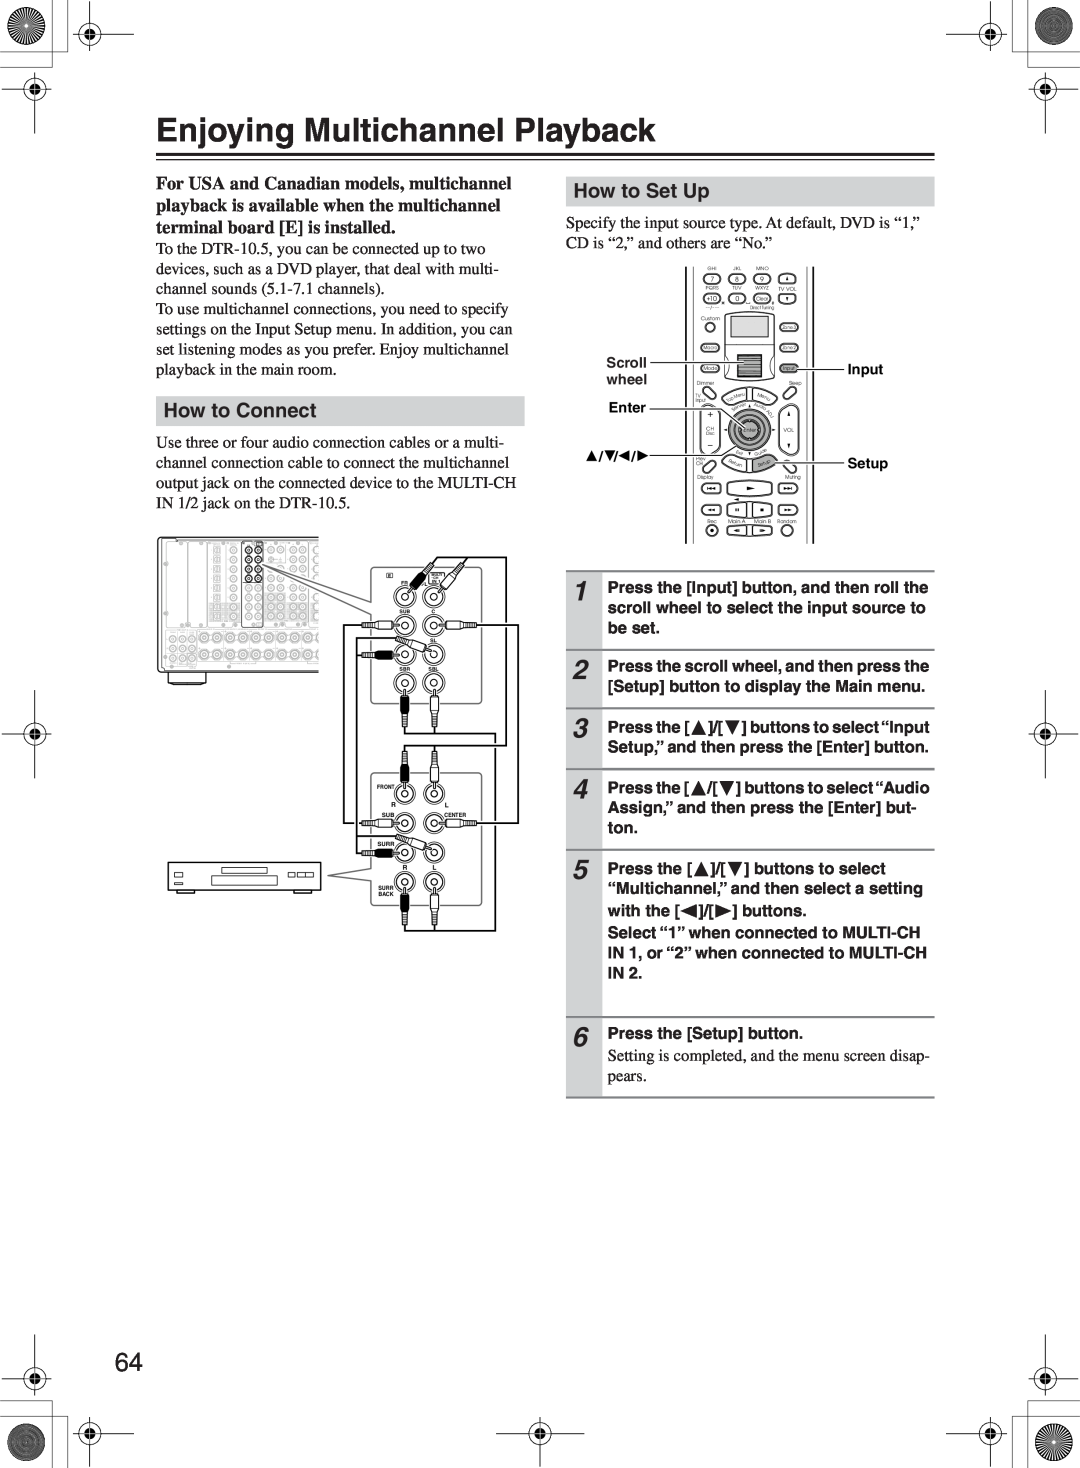 Integra DTR-10.5 instruction manual Enjoying Multichannel Playback, How to Set Up, How to Connect 